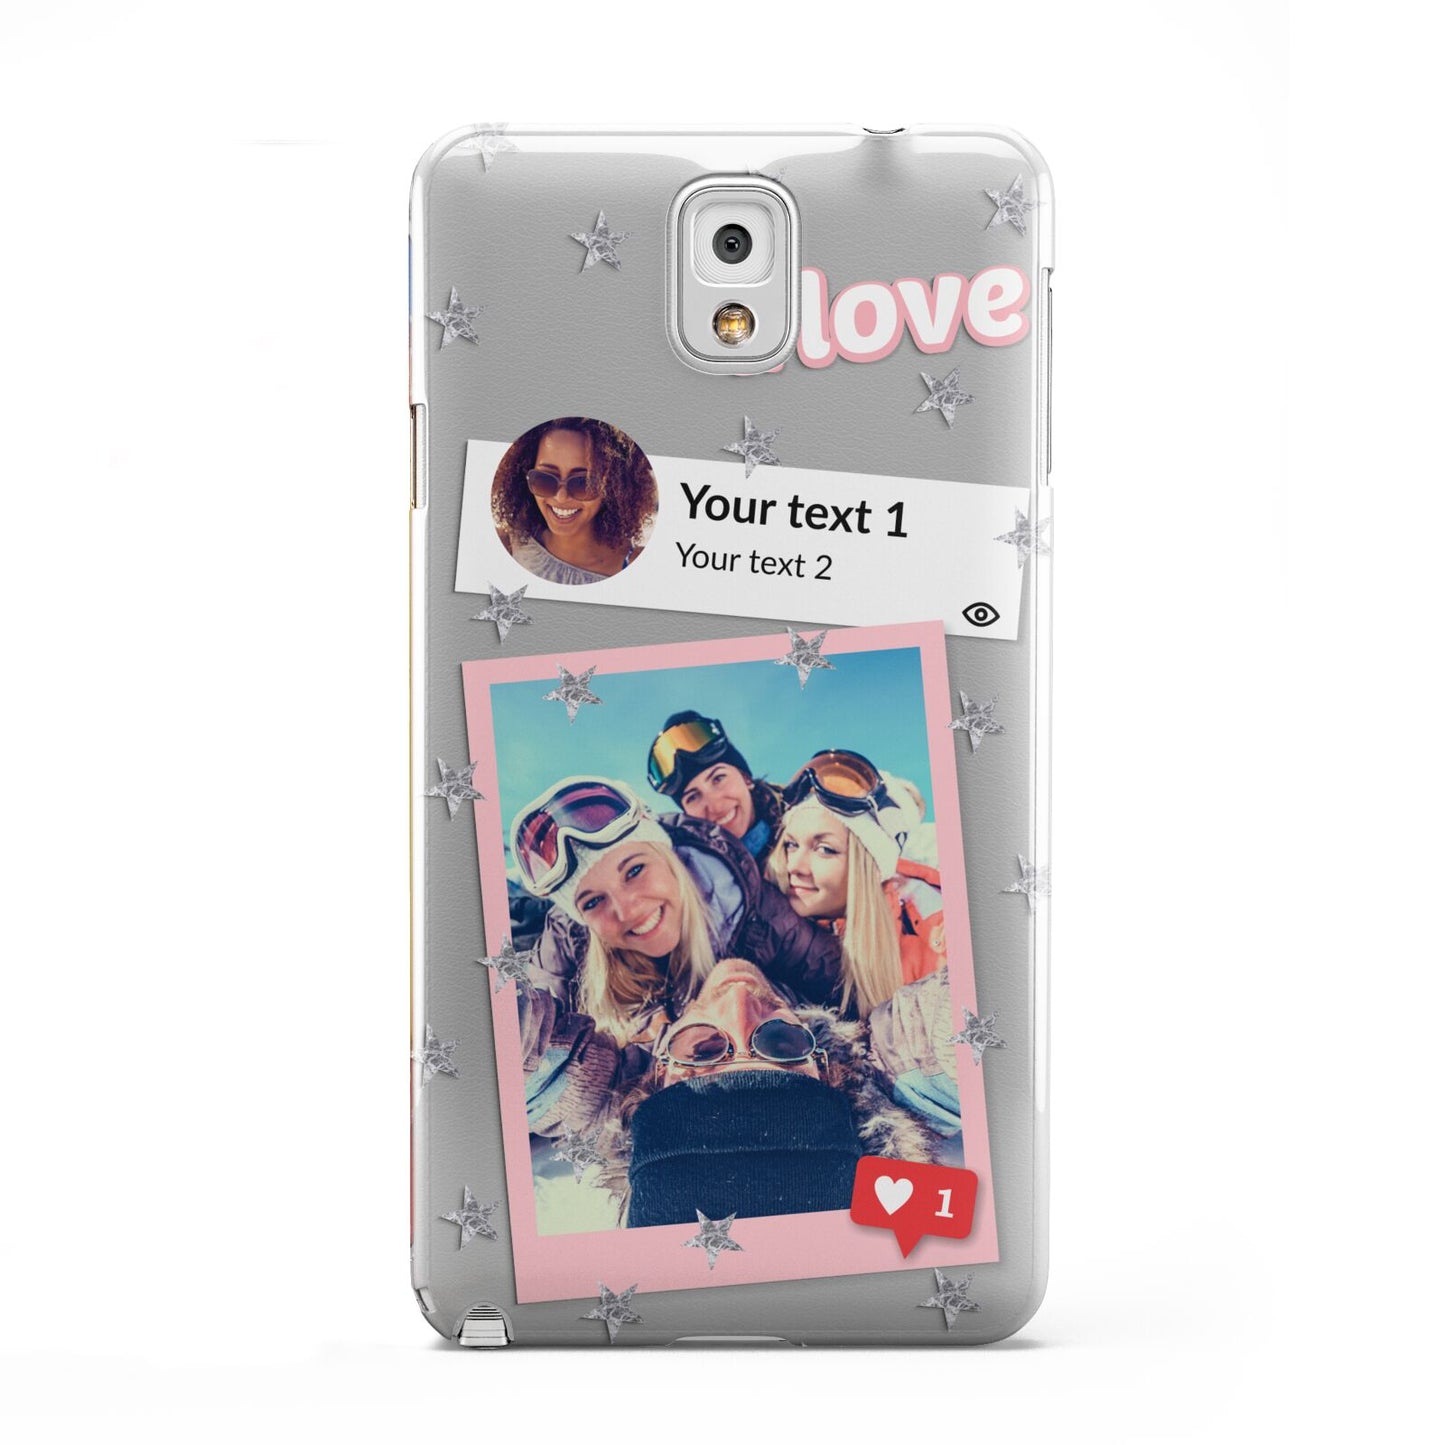 Starry Social Media Photo Montage Upload with Text Samsung Galaxy Note 3 Case